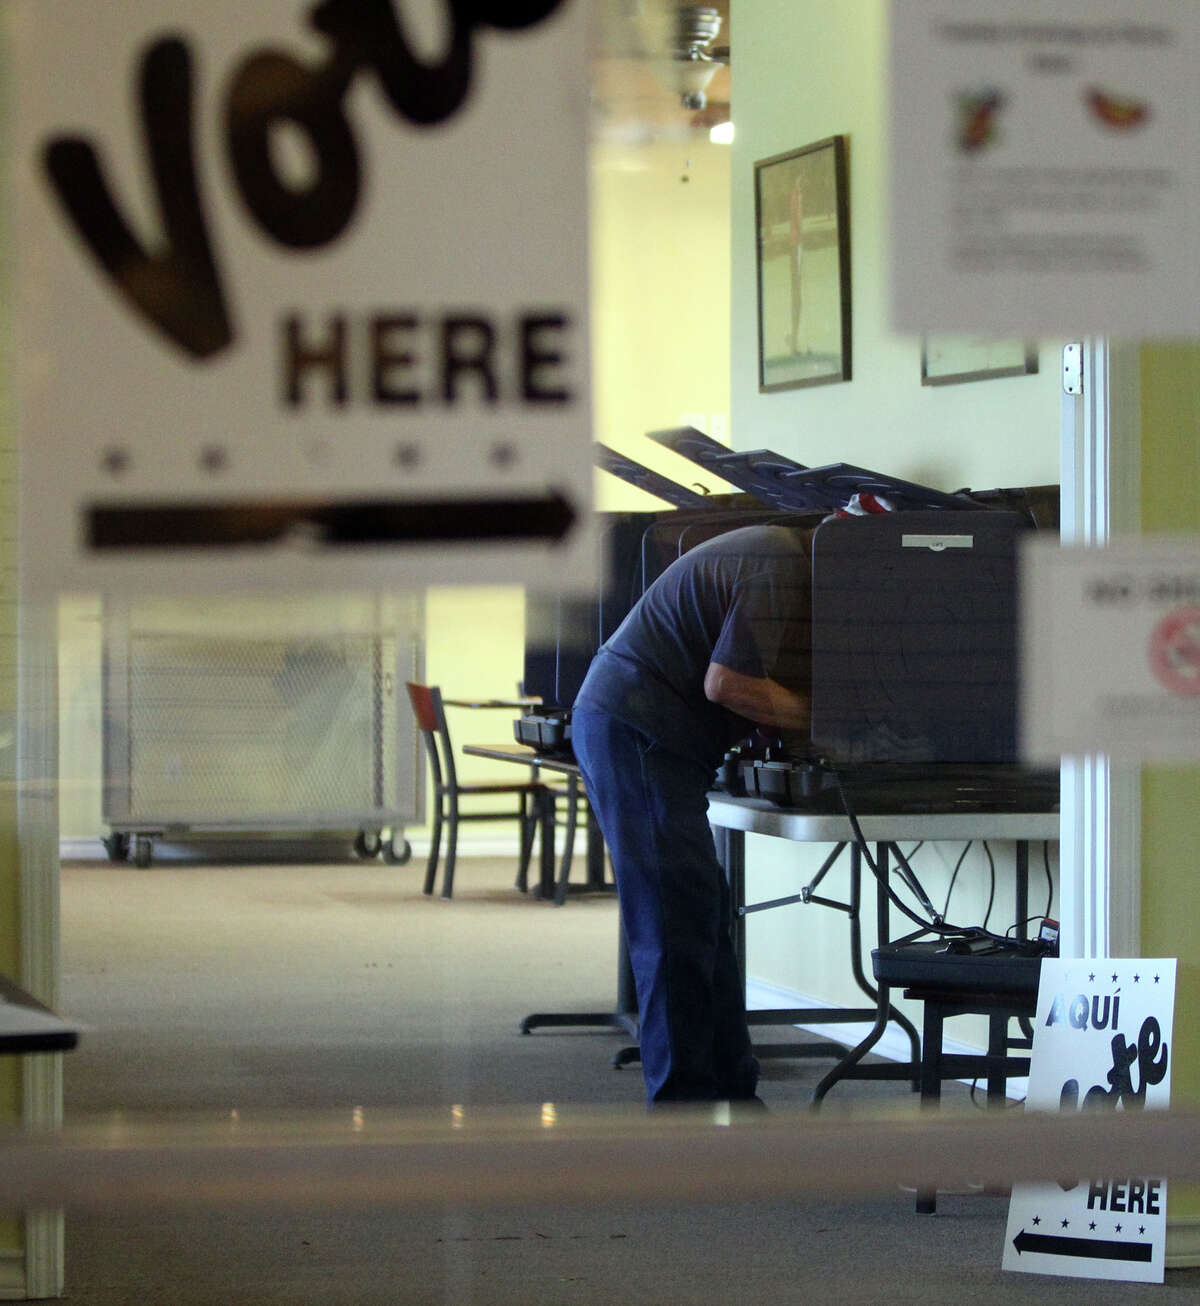 A man leans into a voting booth Tuesday, May 29, 2012, at the Olmos Basin Golf Course a few minutes after 7 a.m.